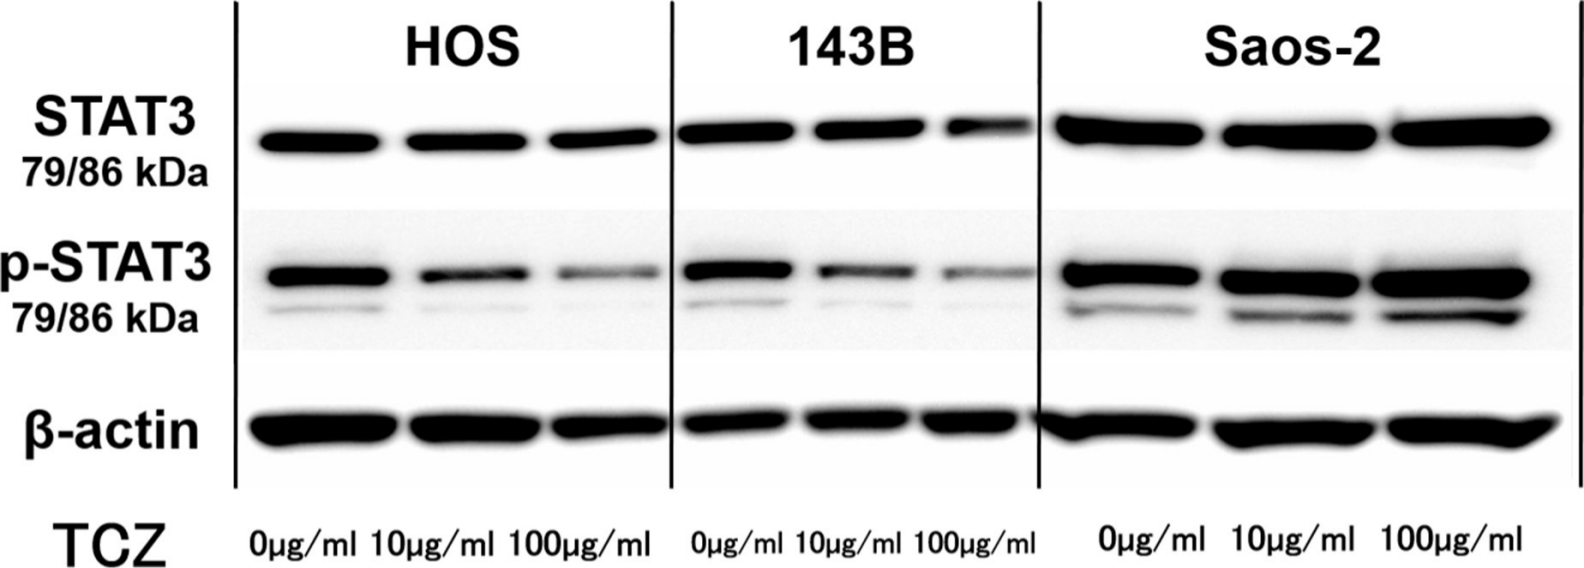 Fig. 6 
            Representative western blot images showing effect of tocilizumab (TCZ) treatment on phosphorylation of signal transducer and activator of transcription 3 (STAT3) in 143B, HOS, and Saos-2 cells with recombinant human interleukin-6 (IL-6). p-STAT3, phospho-STAT3.
          